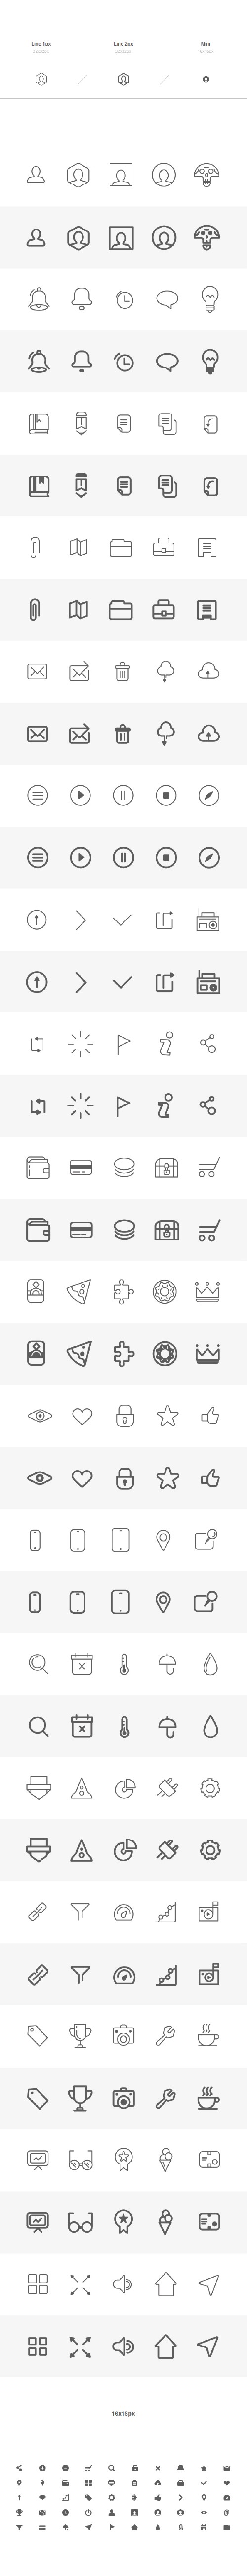 230 Wireframe Icons